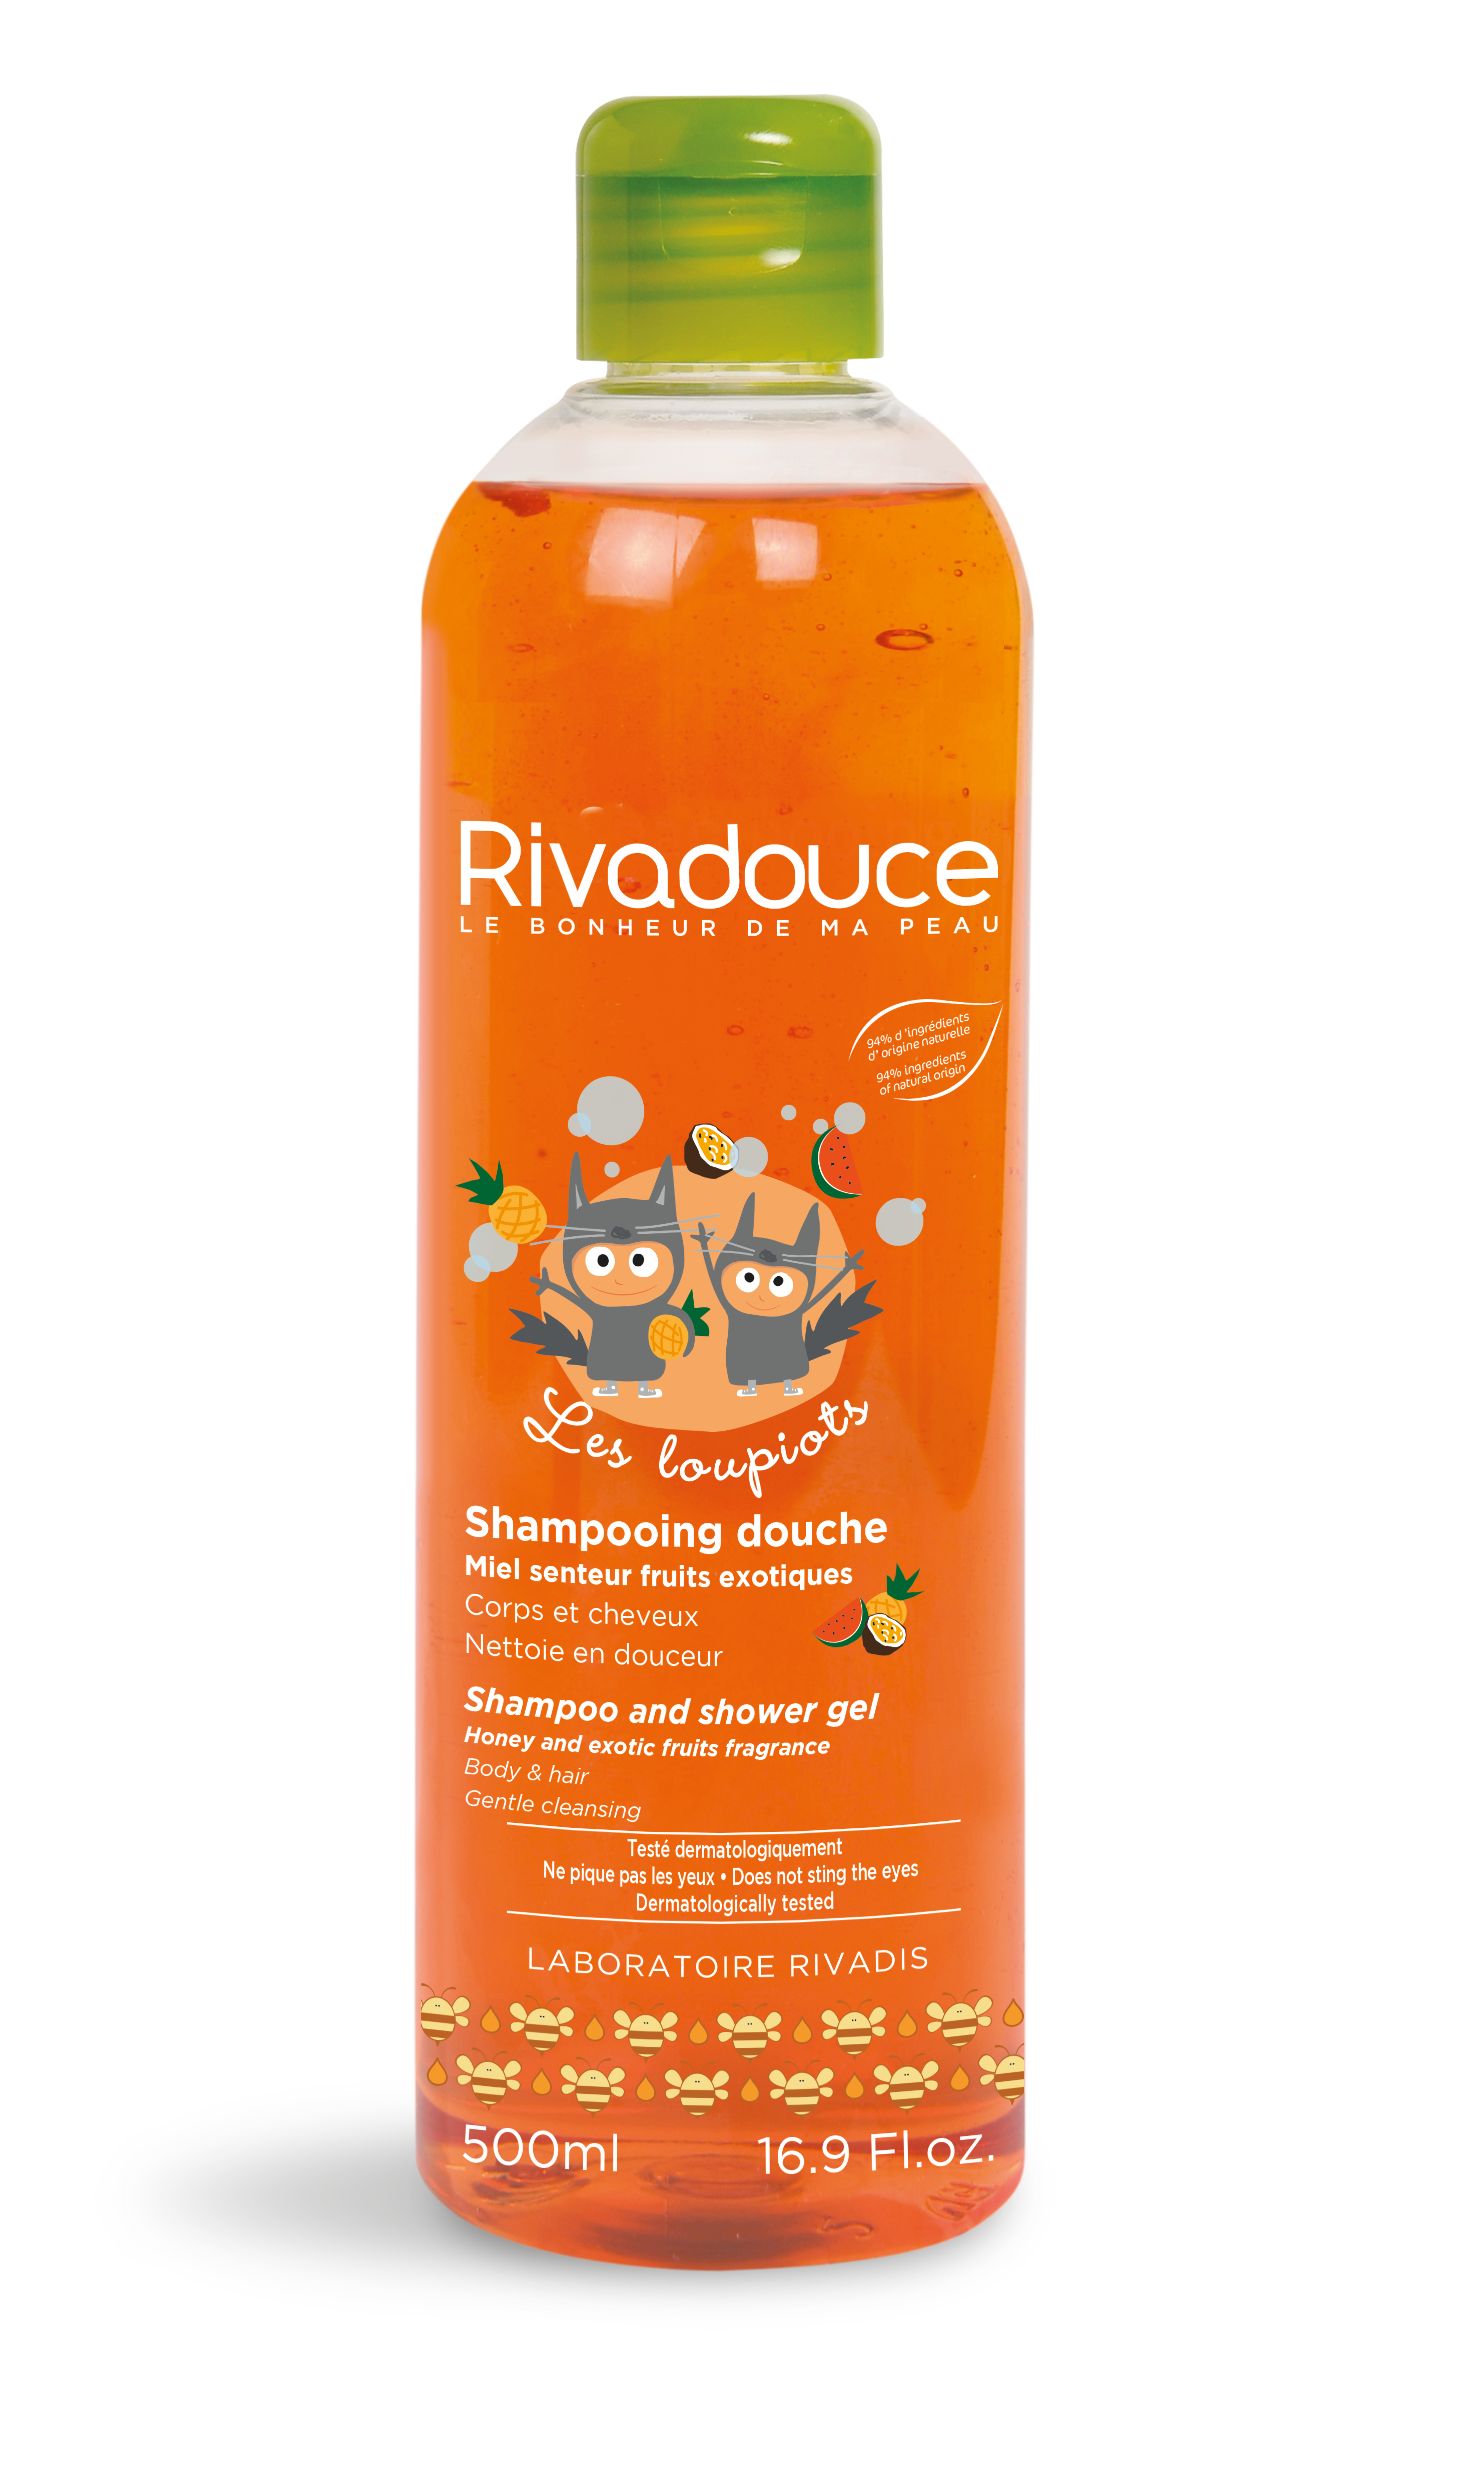 baby-fair Rivadouce Loupiots Shampooing Douche Miel et Fruits Exotiques (Honey and Exotic Fruits Shampoo and Body Wash) 500ml